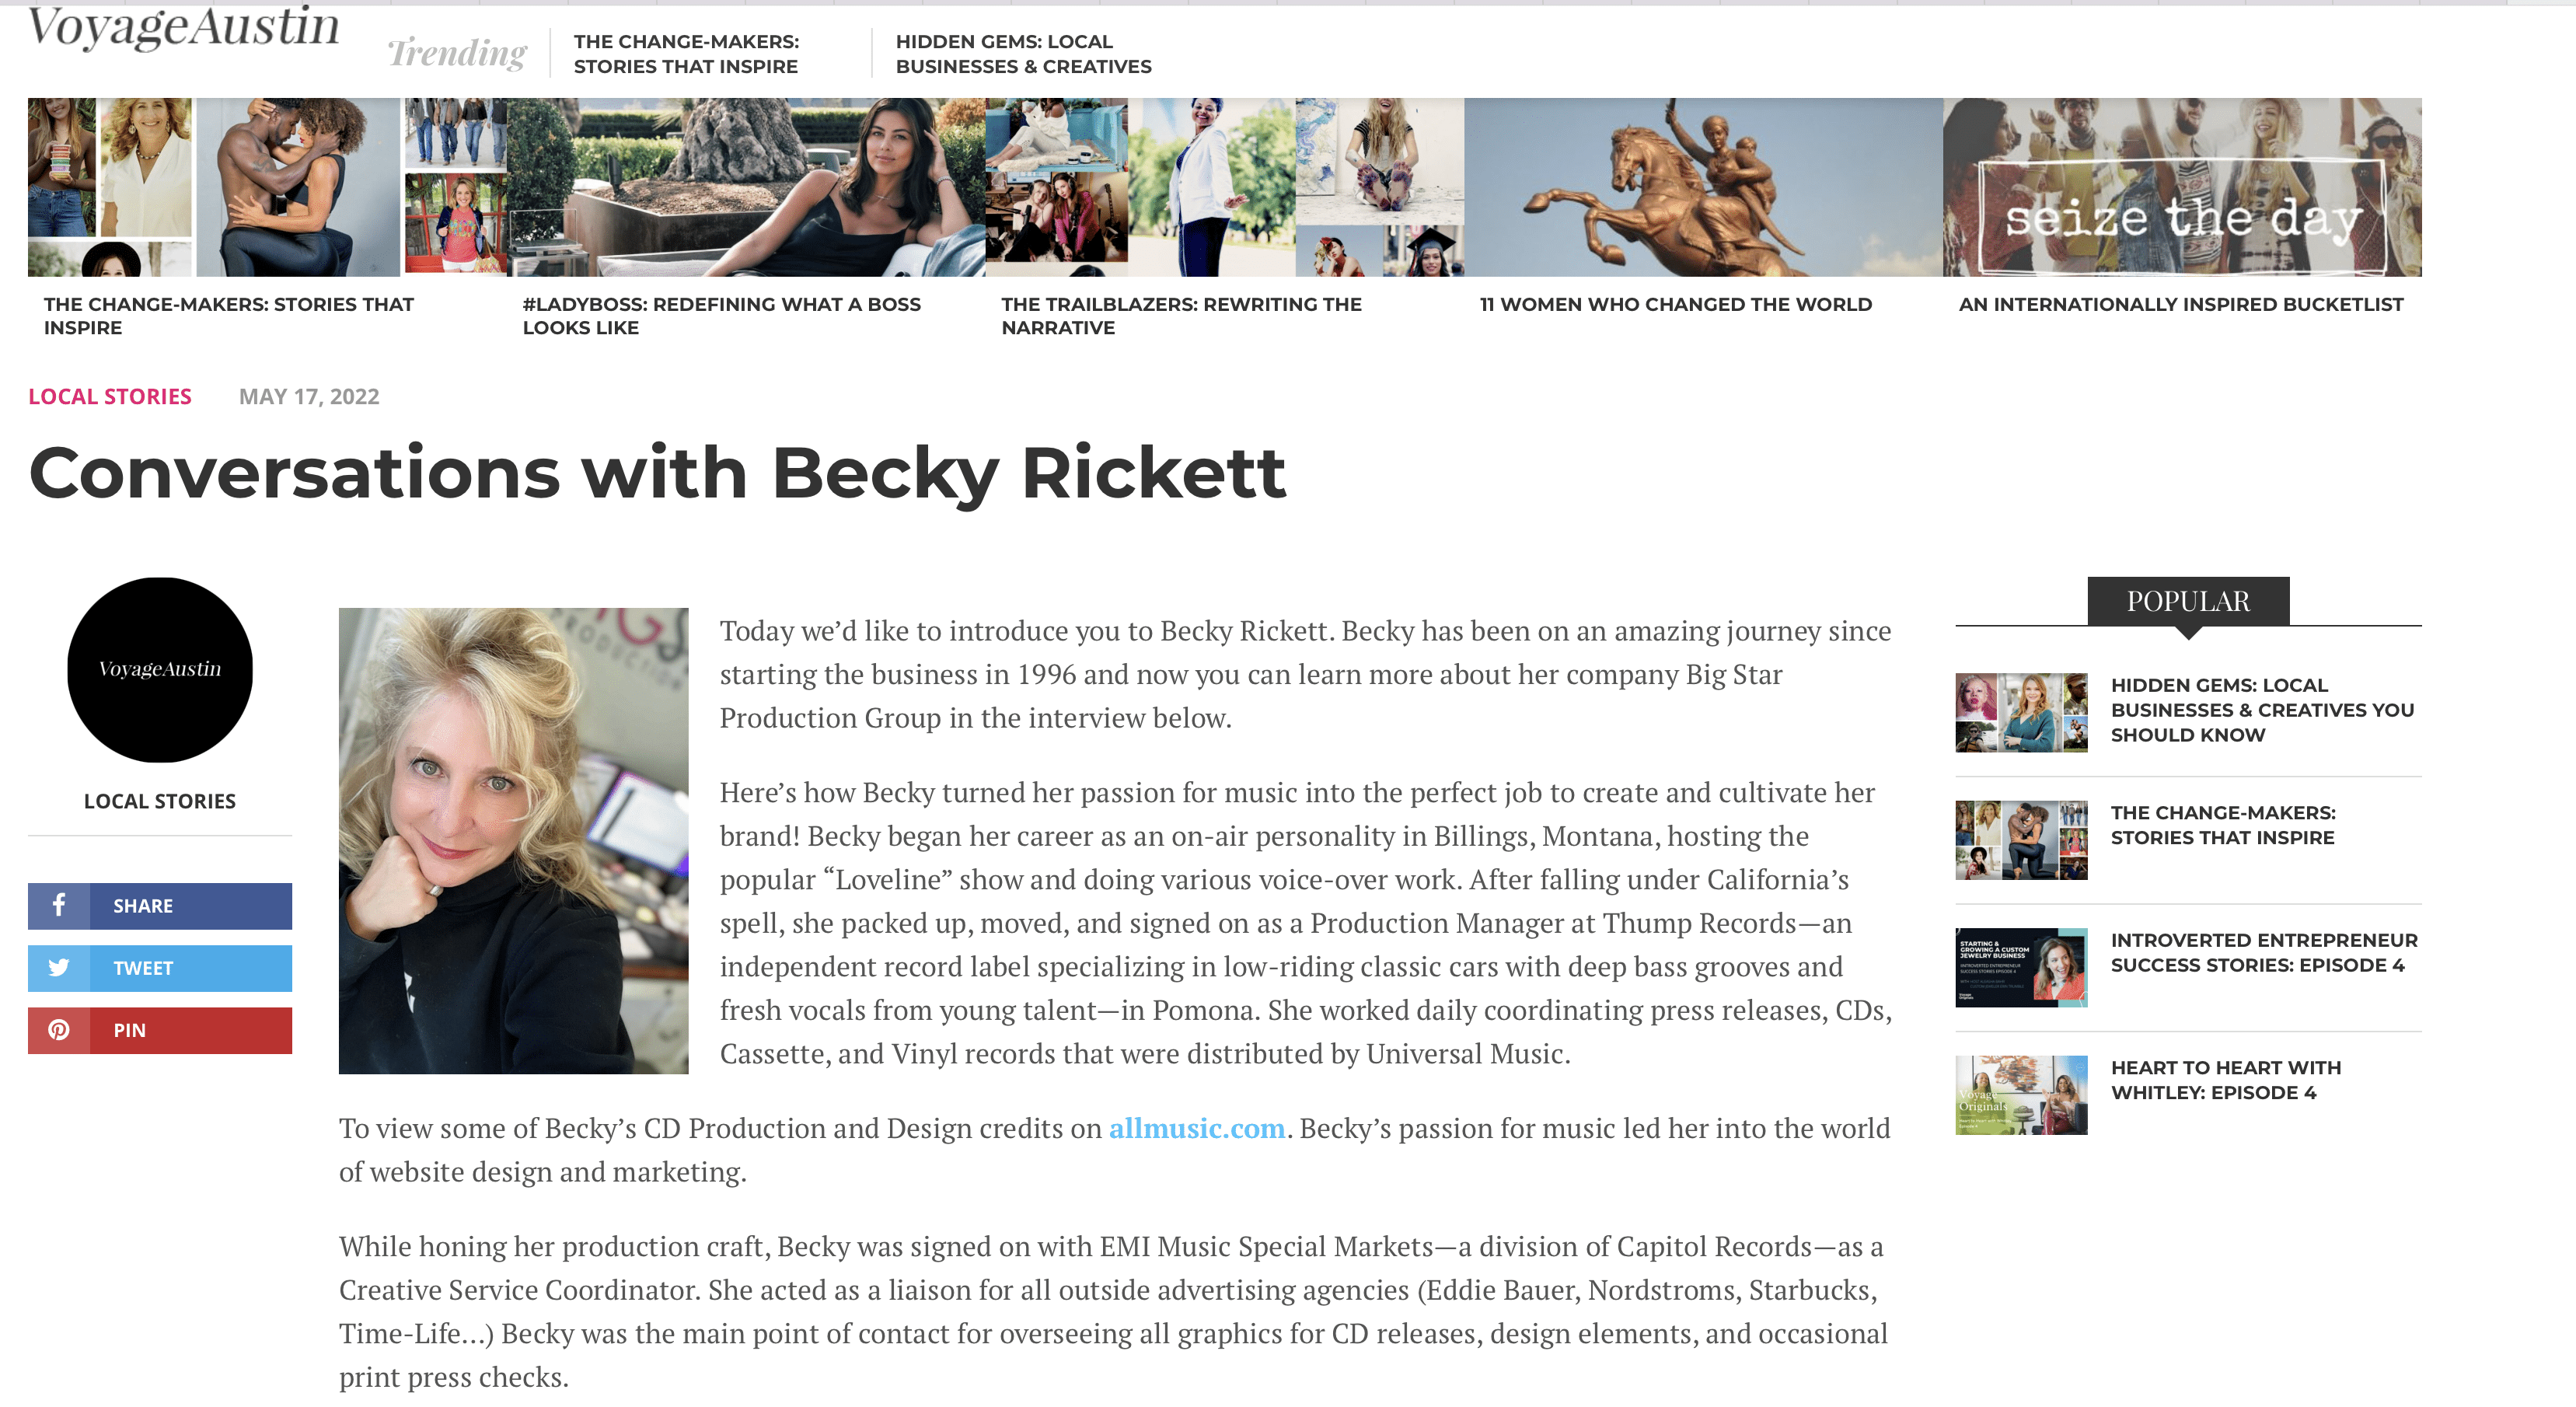 Conversations with Becky Rickett an interview with Voyage Austin Magazine